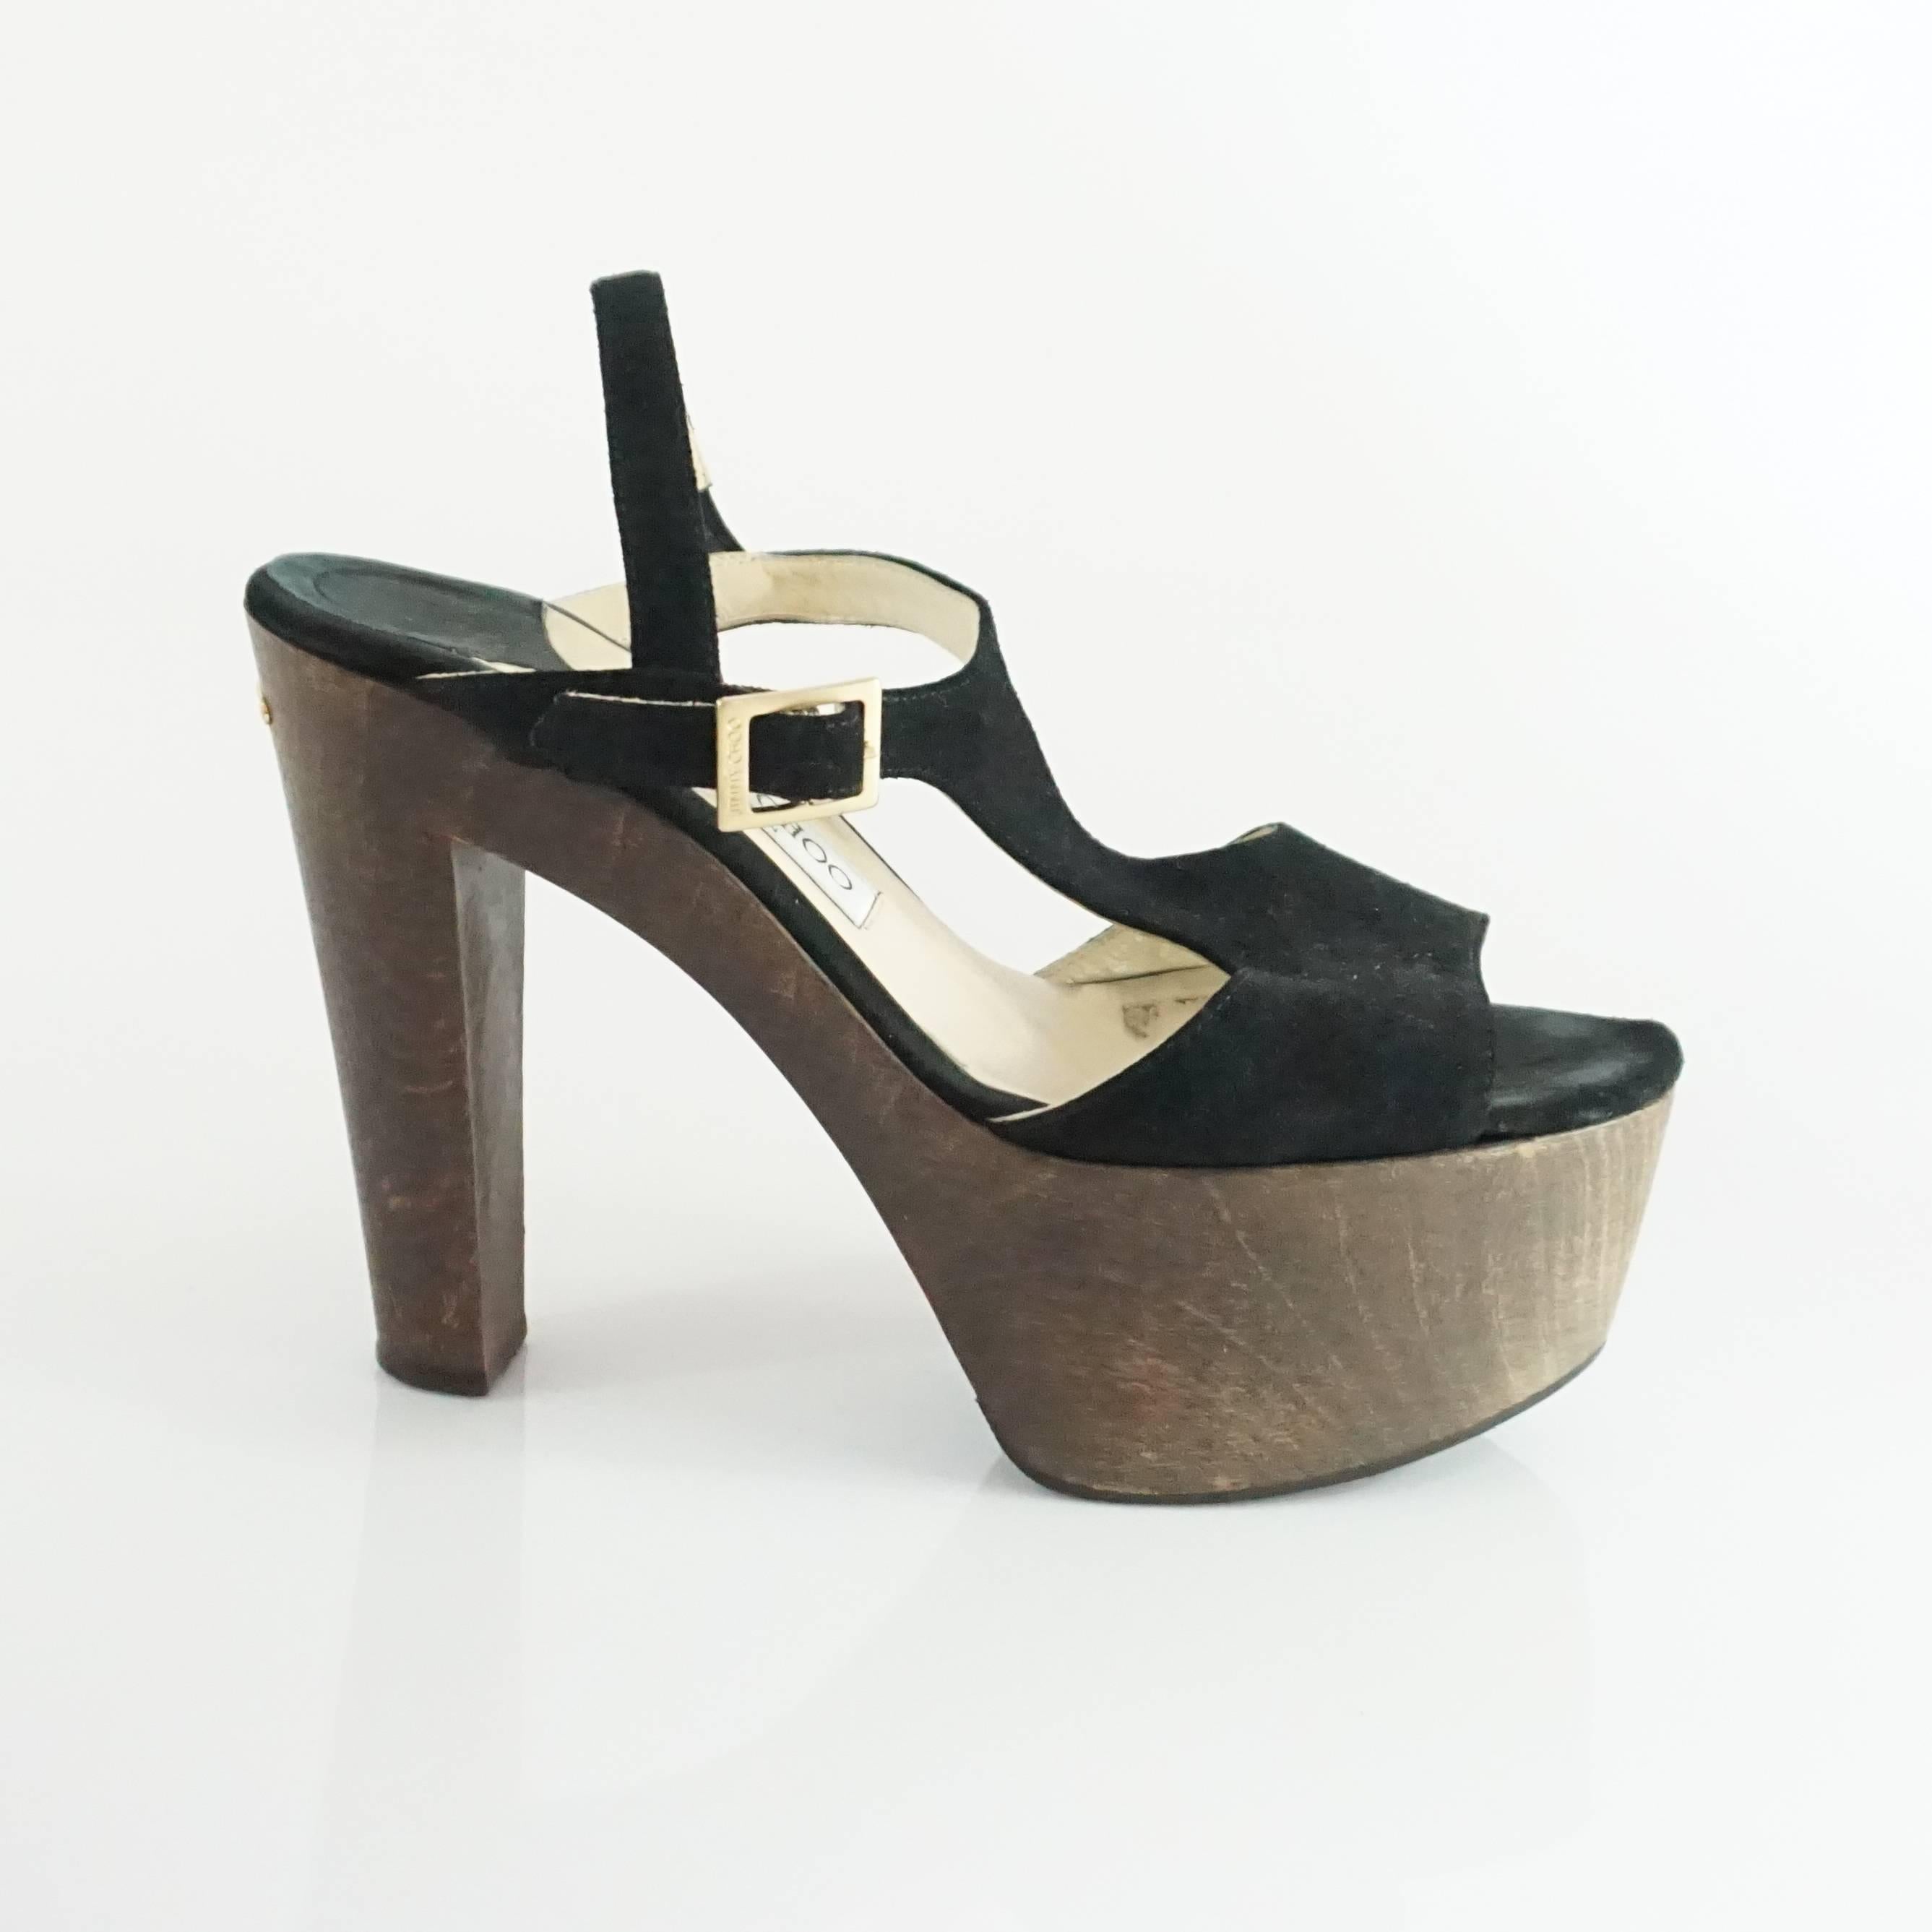 These Jimmy Choo platform heels are show stoppers. They are made of black suede and have a t-strap, wooden platform and heel, and Jimmy Choo logo plaque in the back. They are in fair condition with some small marks on the wood platform and wear on